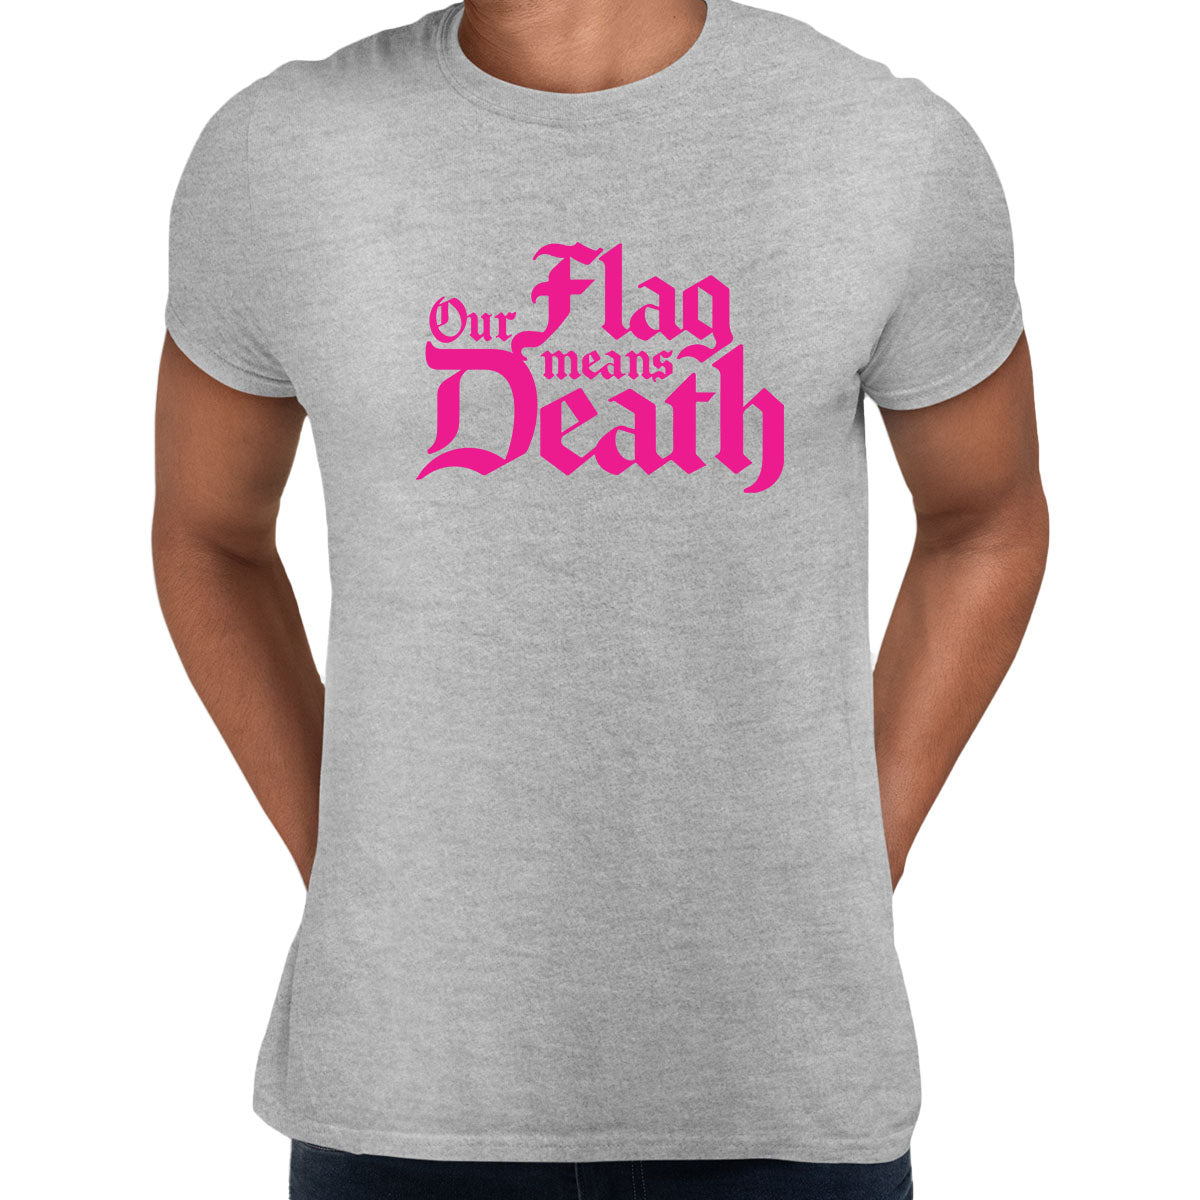 Our Flag means death Pirates of the Carribean T-shirt - Kuzi Tees